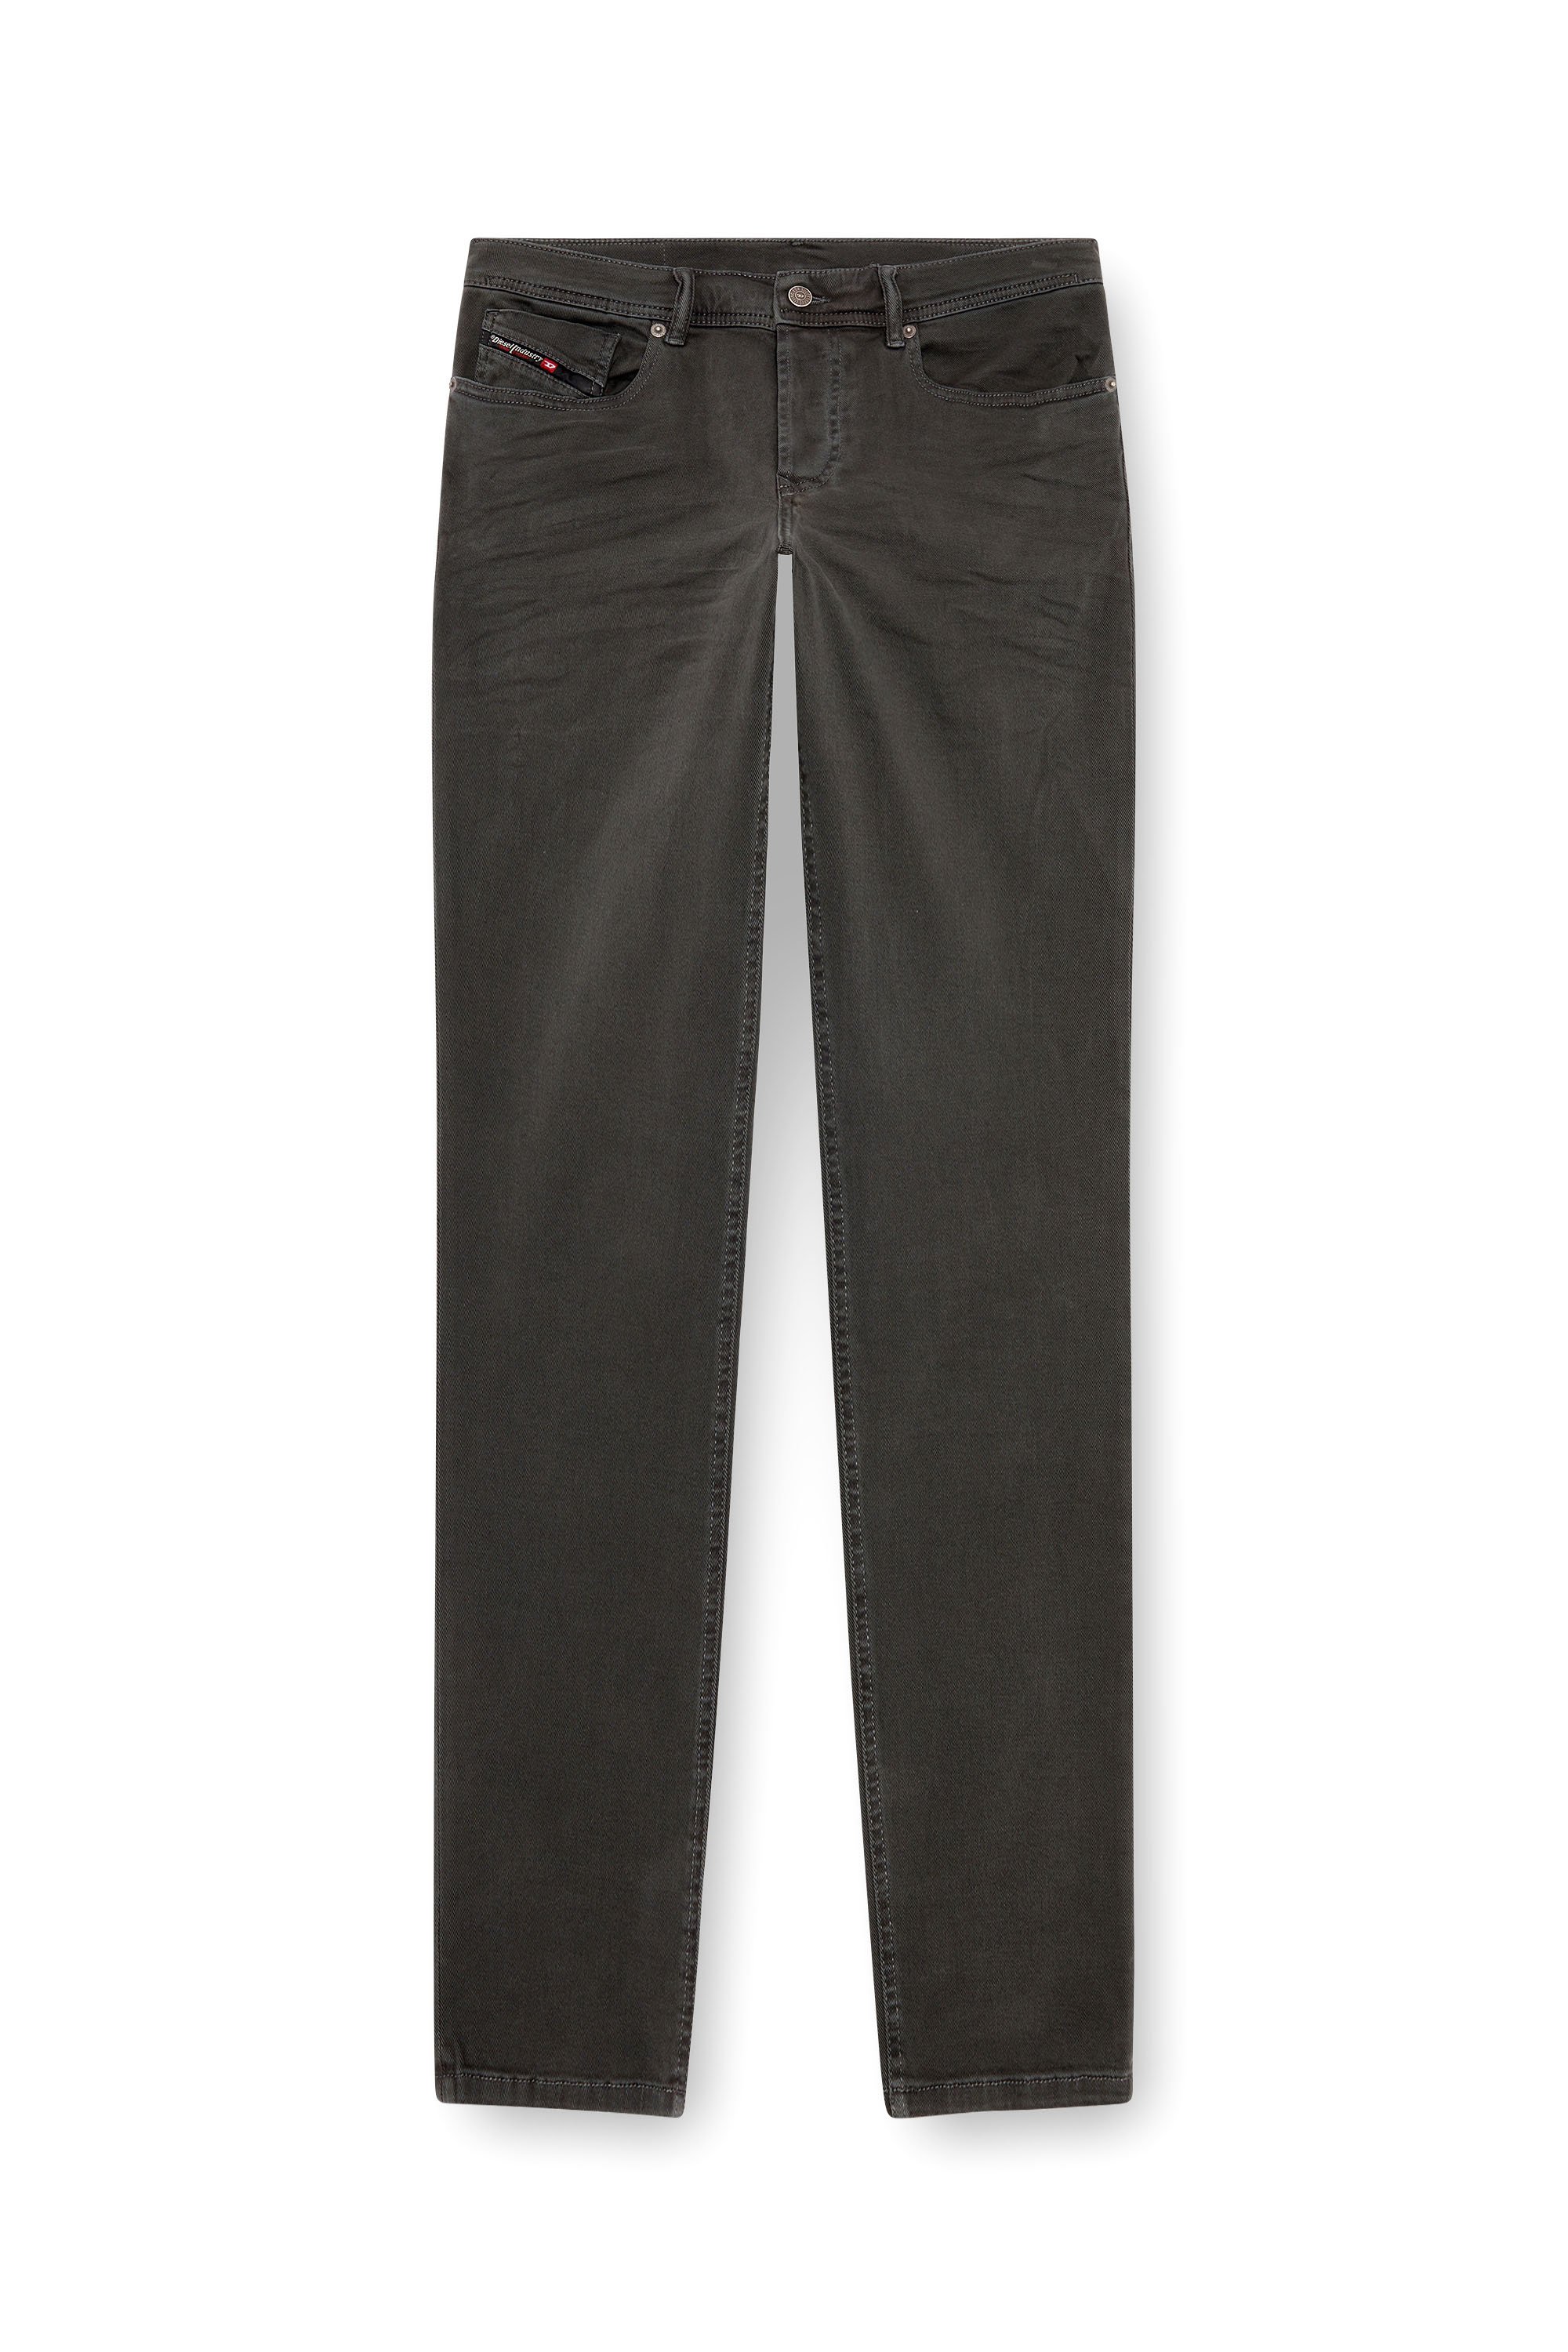 Diesel - Tapered Jeans 2023 D-Finitive 0QWTY, Hombre Tapered Jeans - 2023 D-Finitive in Gris - Image 3